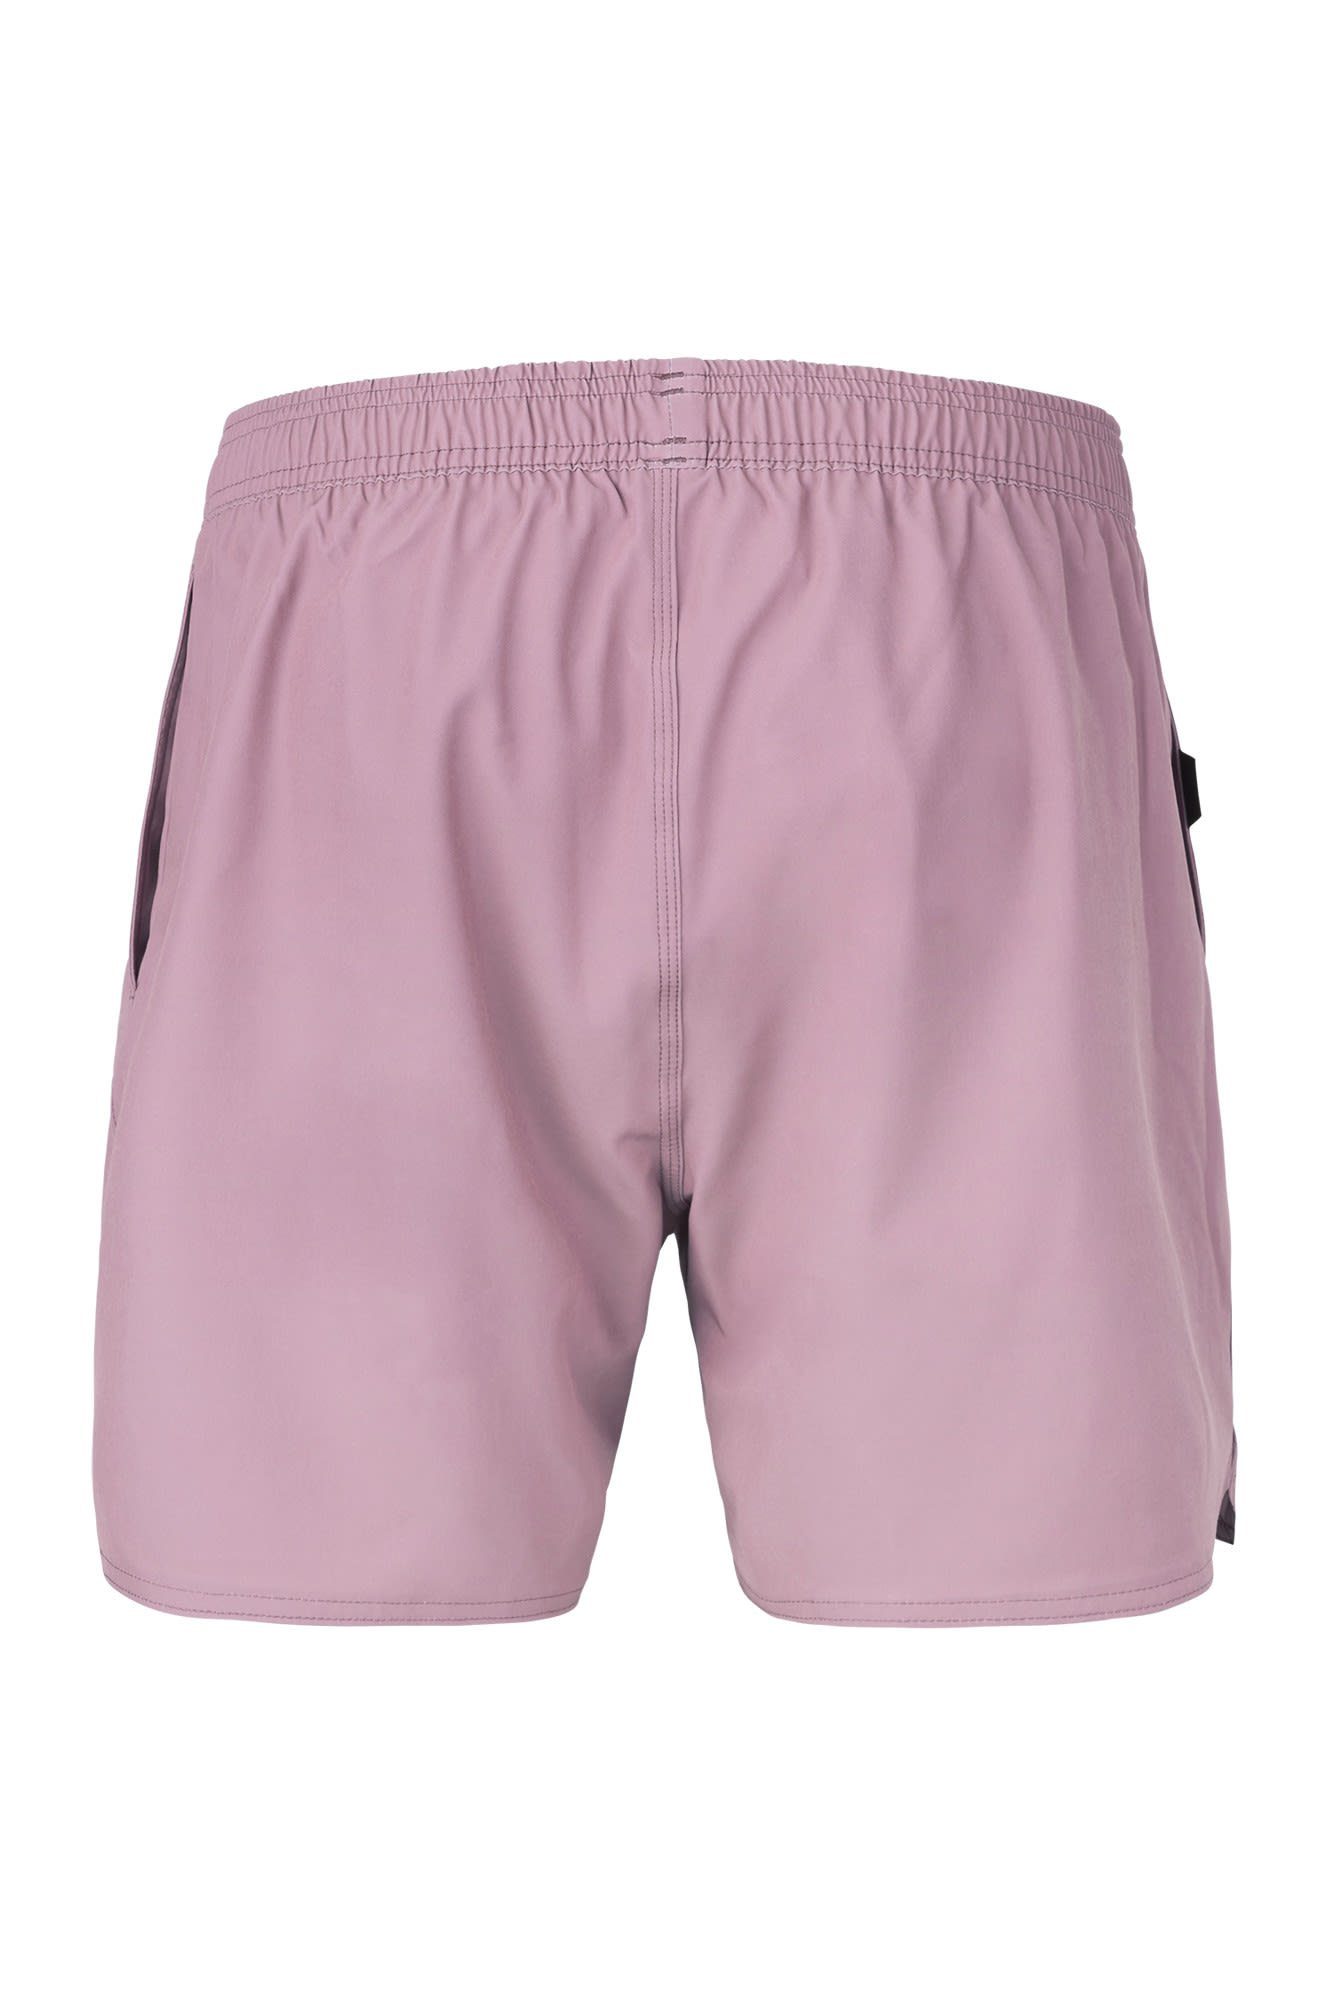 Picture Herren Boardshorts Orchid Dusky Piau 15 Badeshorts Solid Picture M